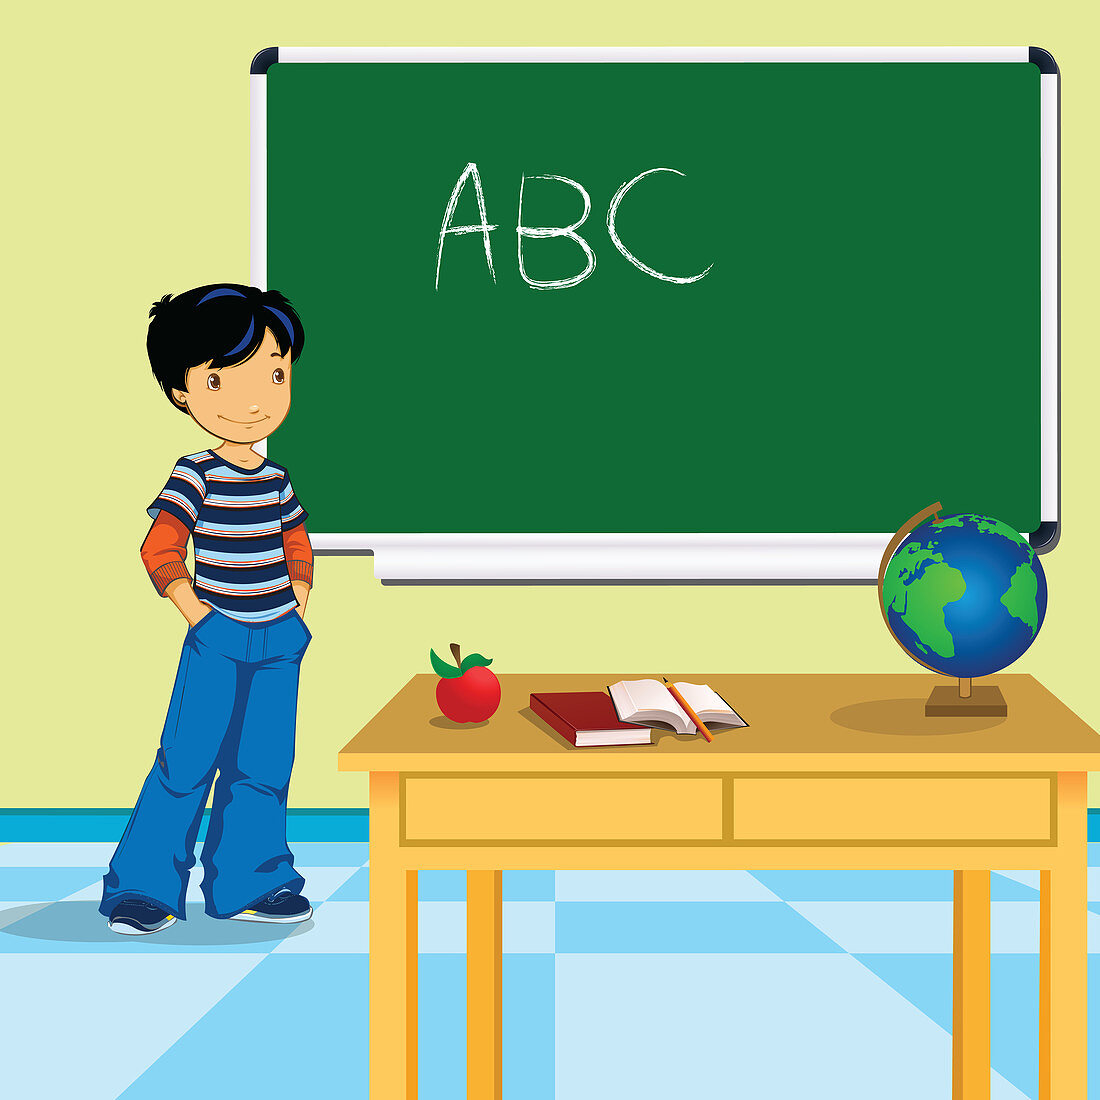 Schoolboy standing in a classroom, illustration